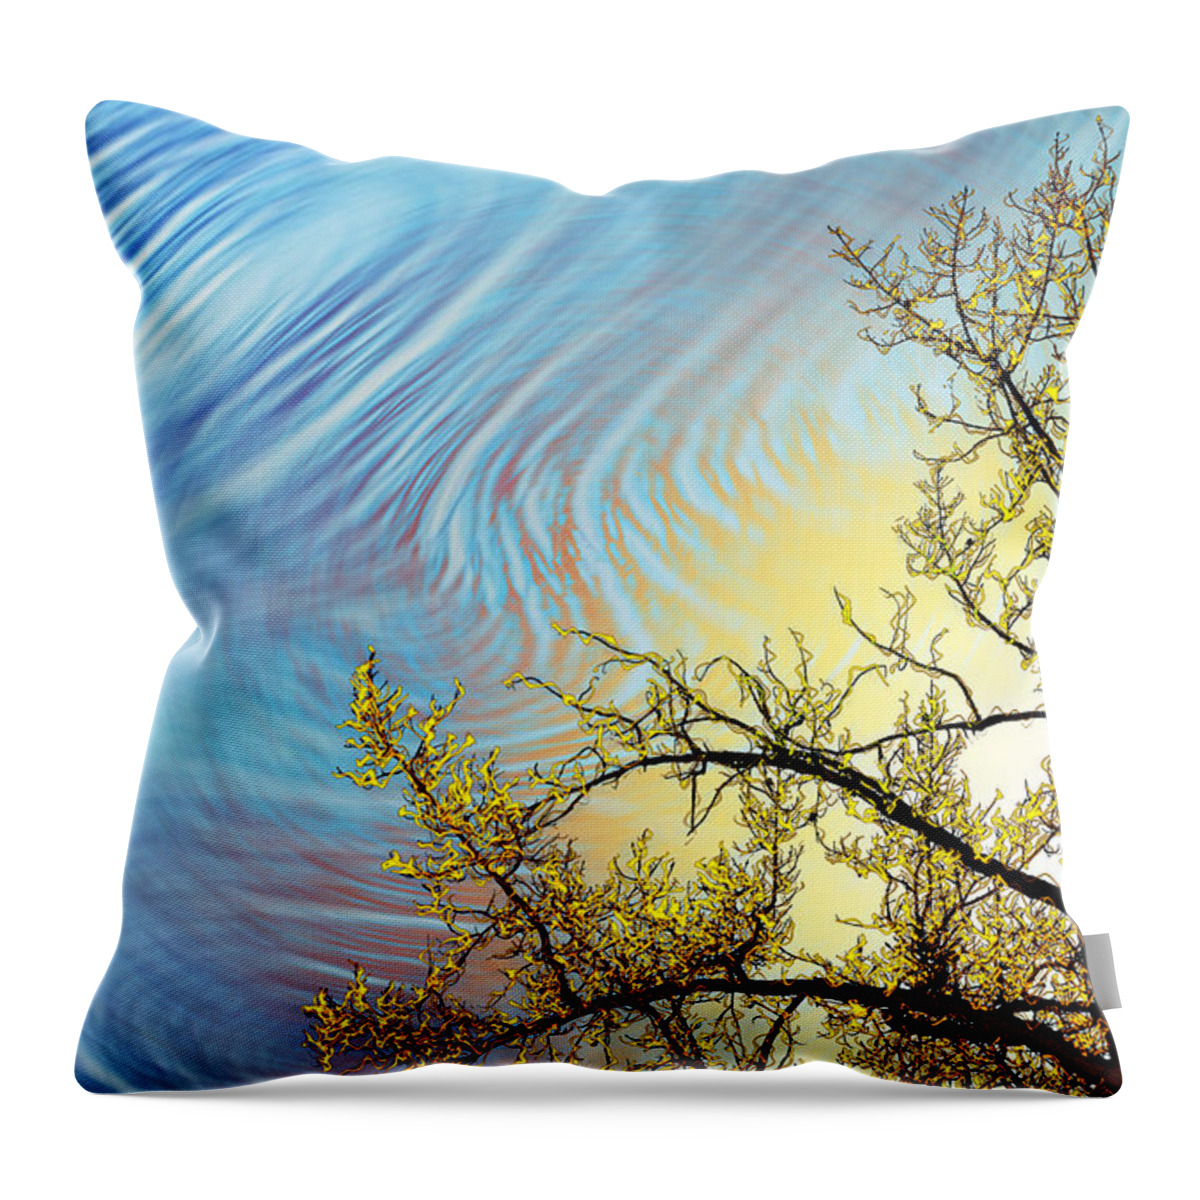 Water Weather Storms And The Sea Throw Pillow featuring the digital art Stimulo-Cirrus by Becky Titus